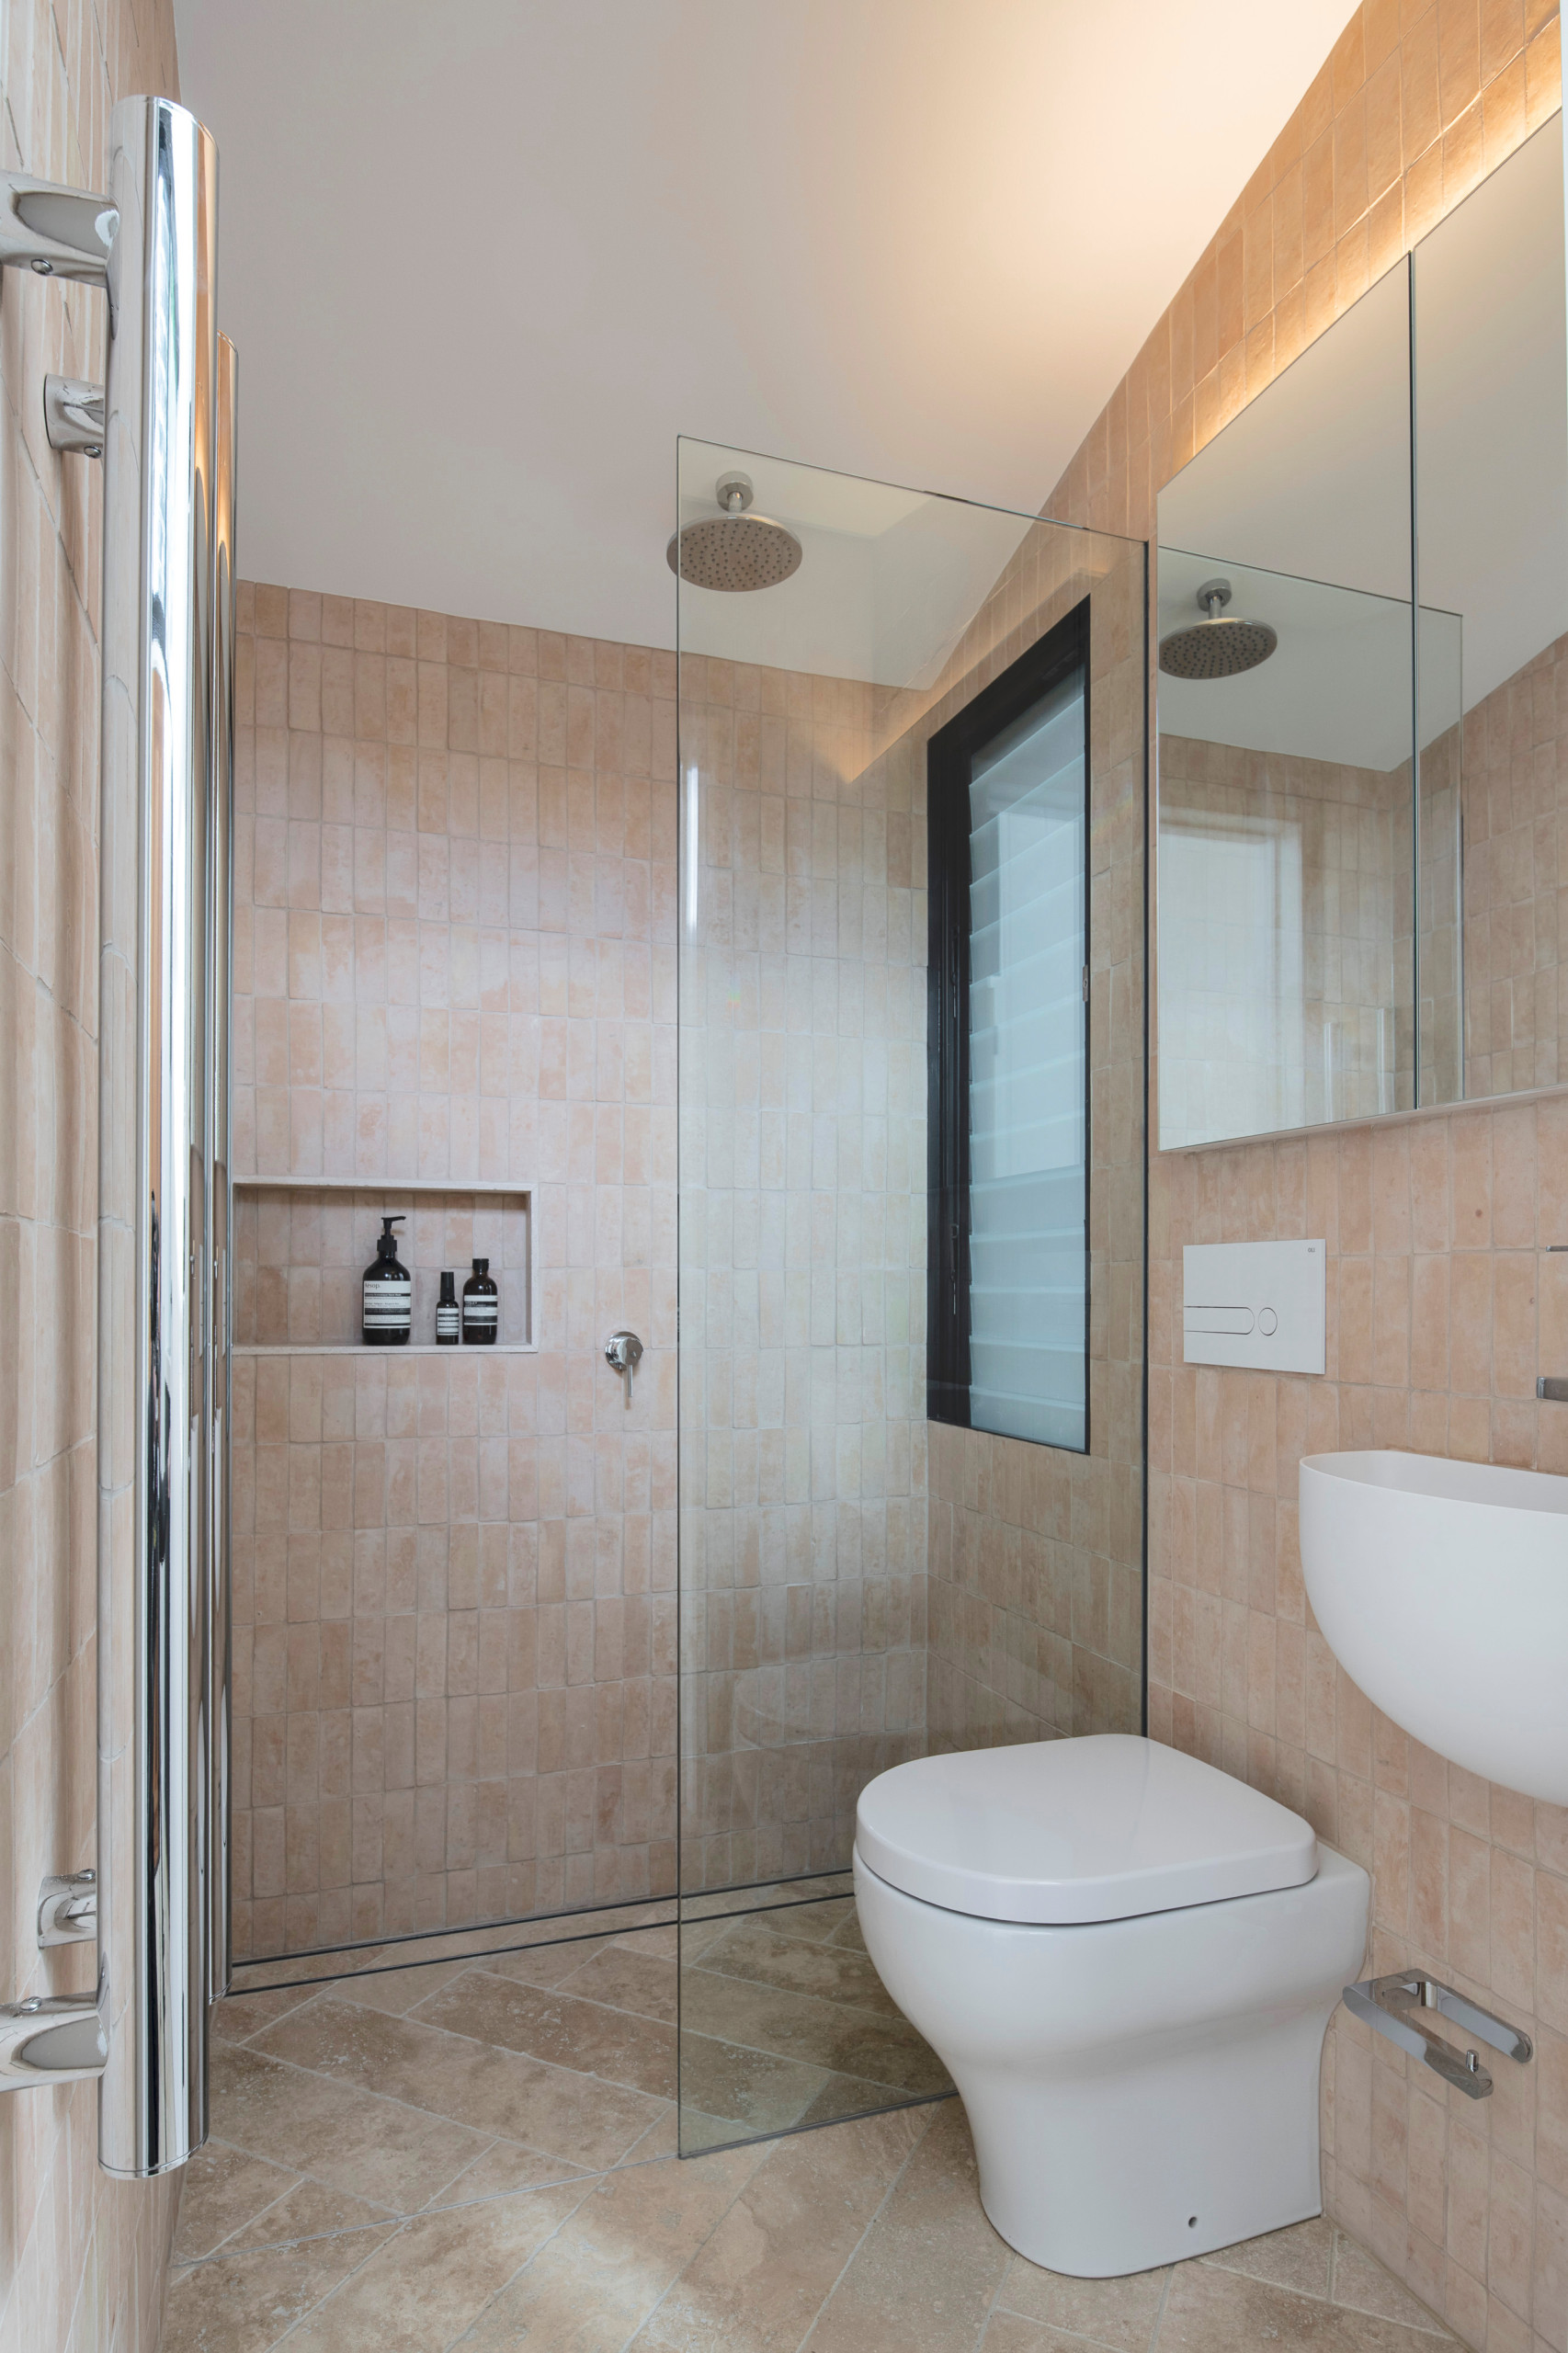 How a Bathroom Facelift Can Improve Your Home